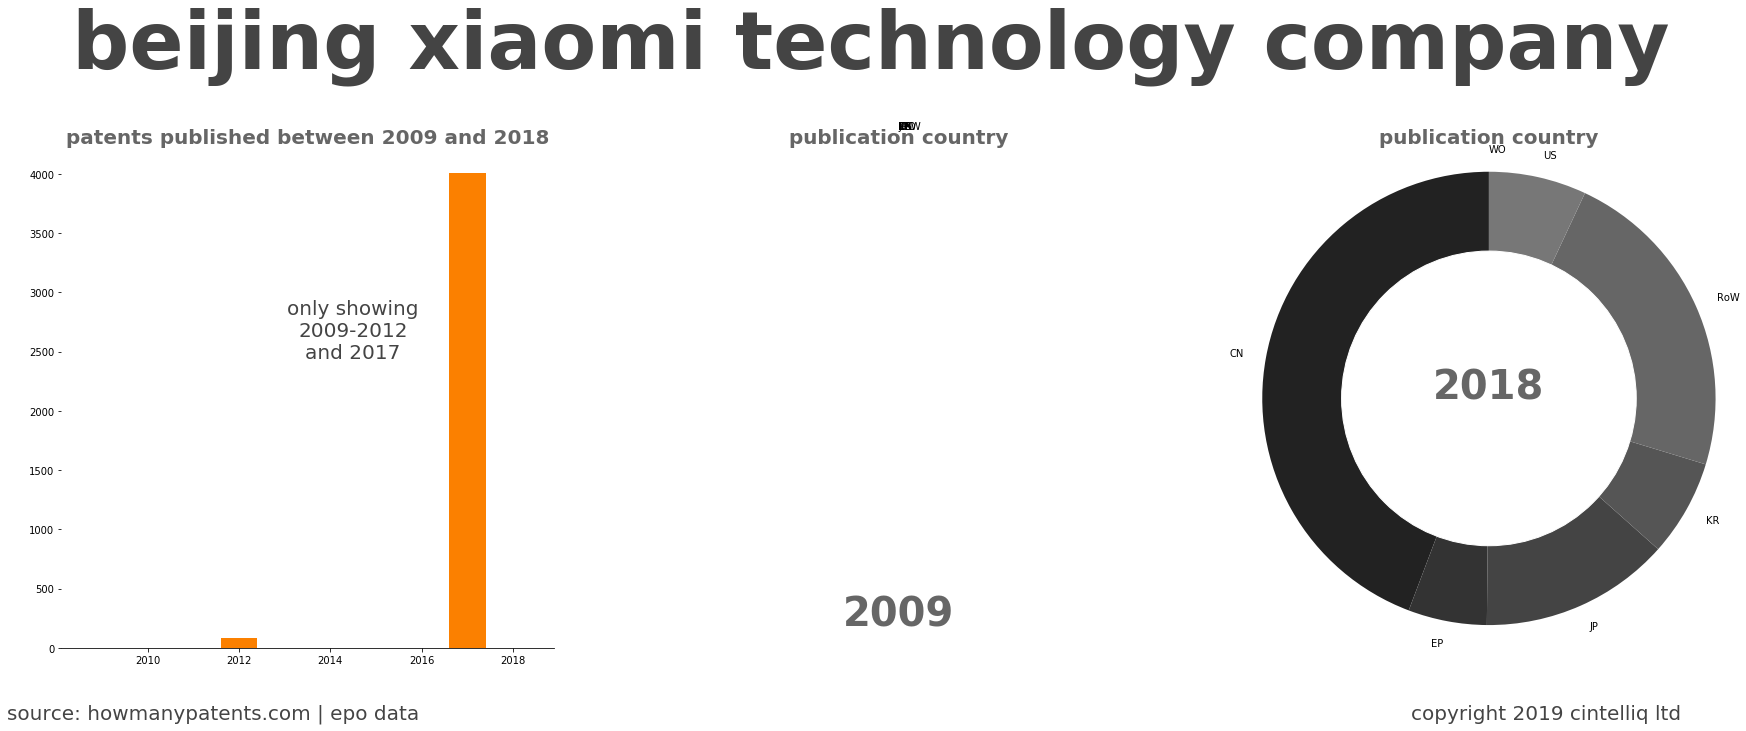 summary of patents for Beijing Xiaomi Technology Company